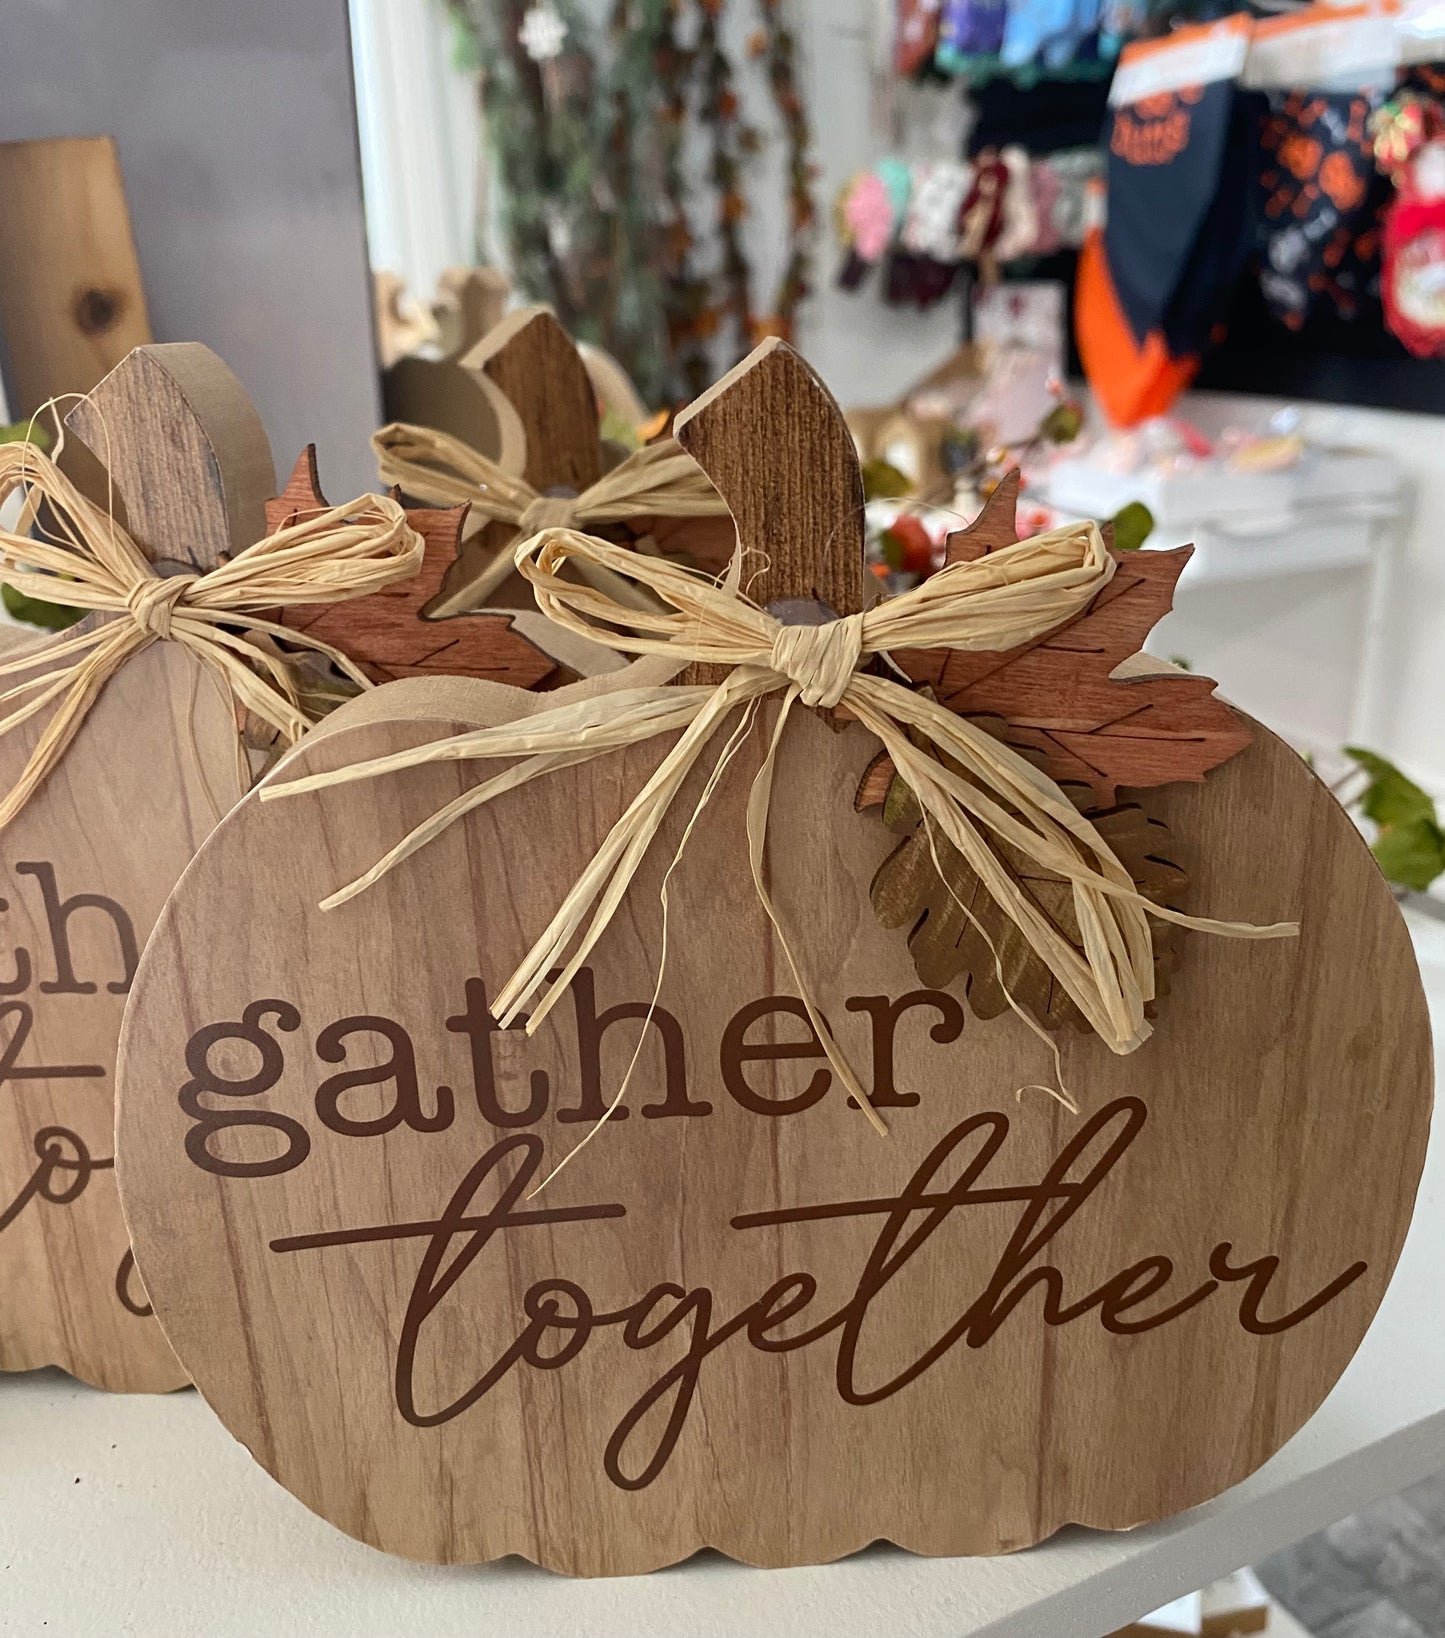 Pumpkin with Sentiment “Gather Together “